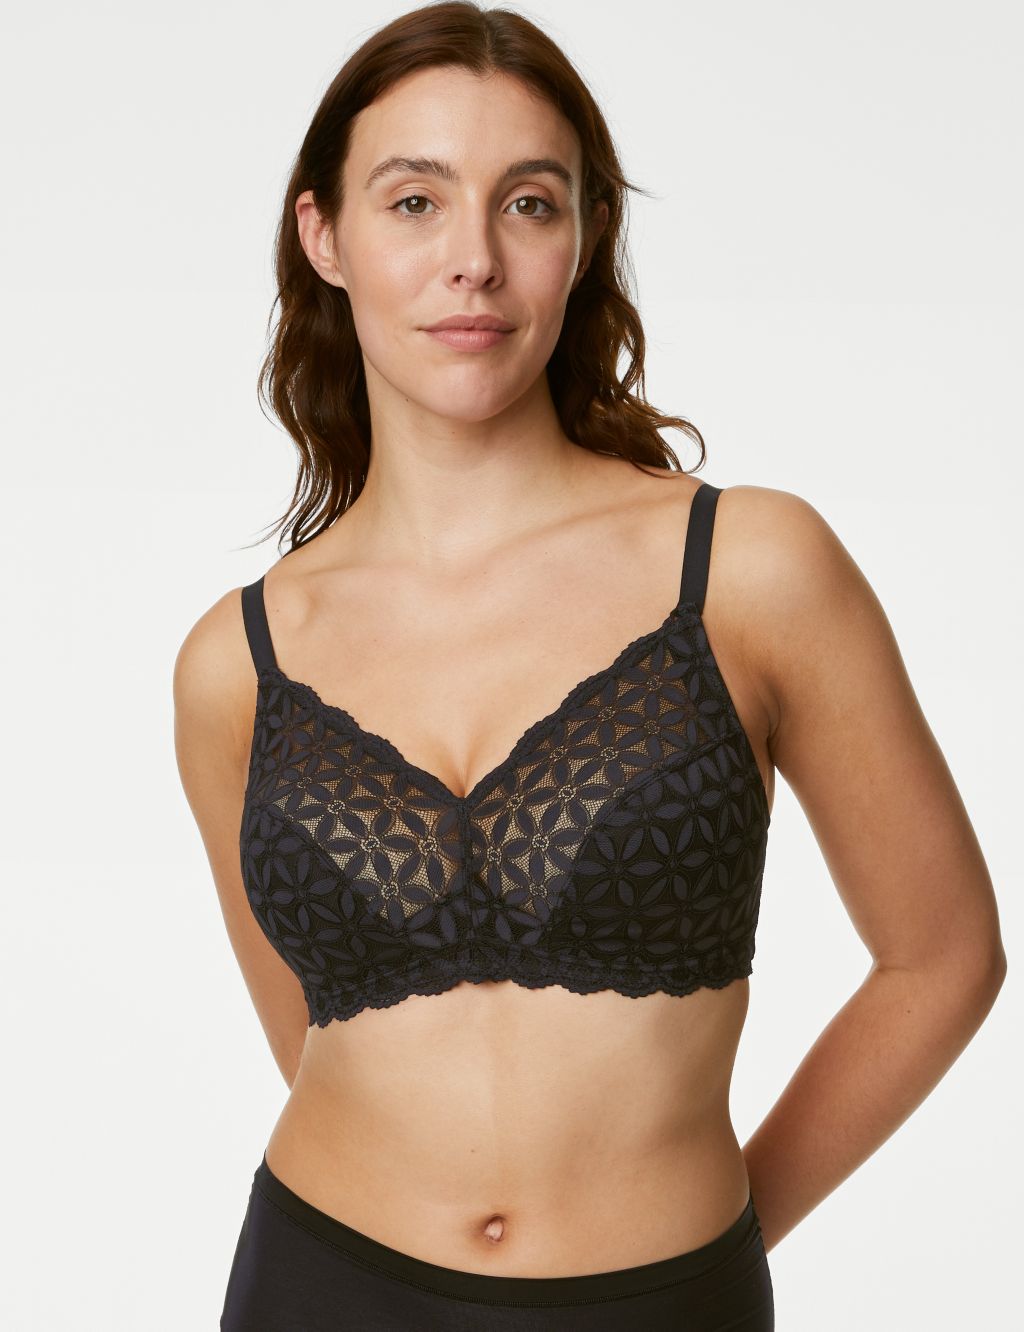 Lace Non-Padded Bralette F-H image 2